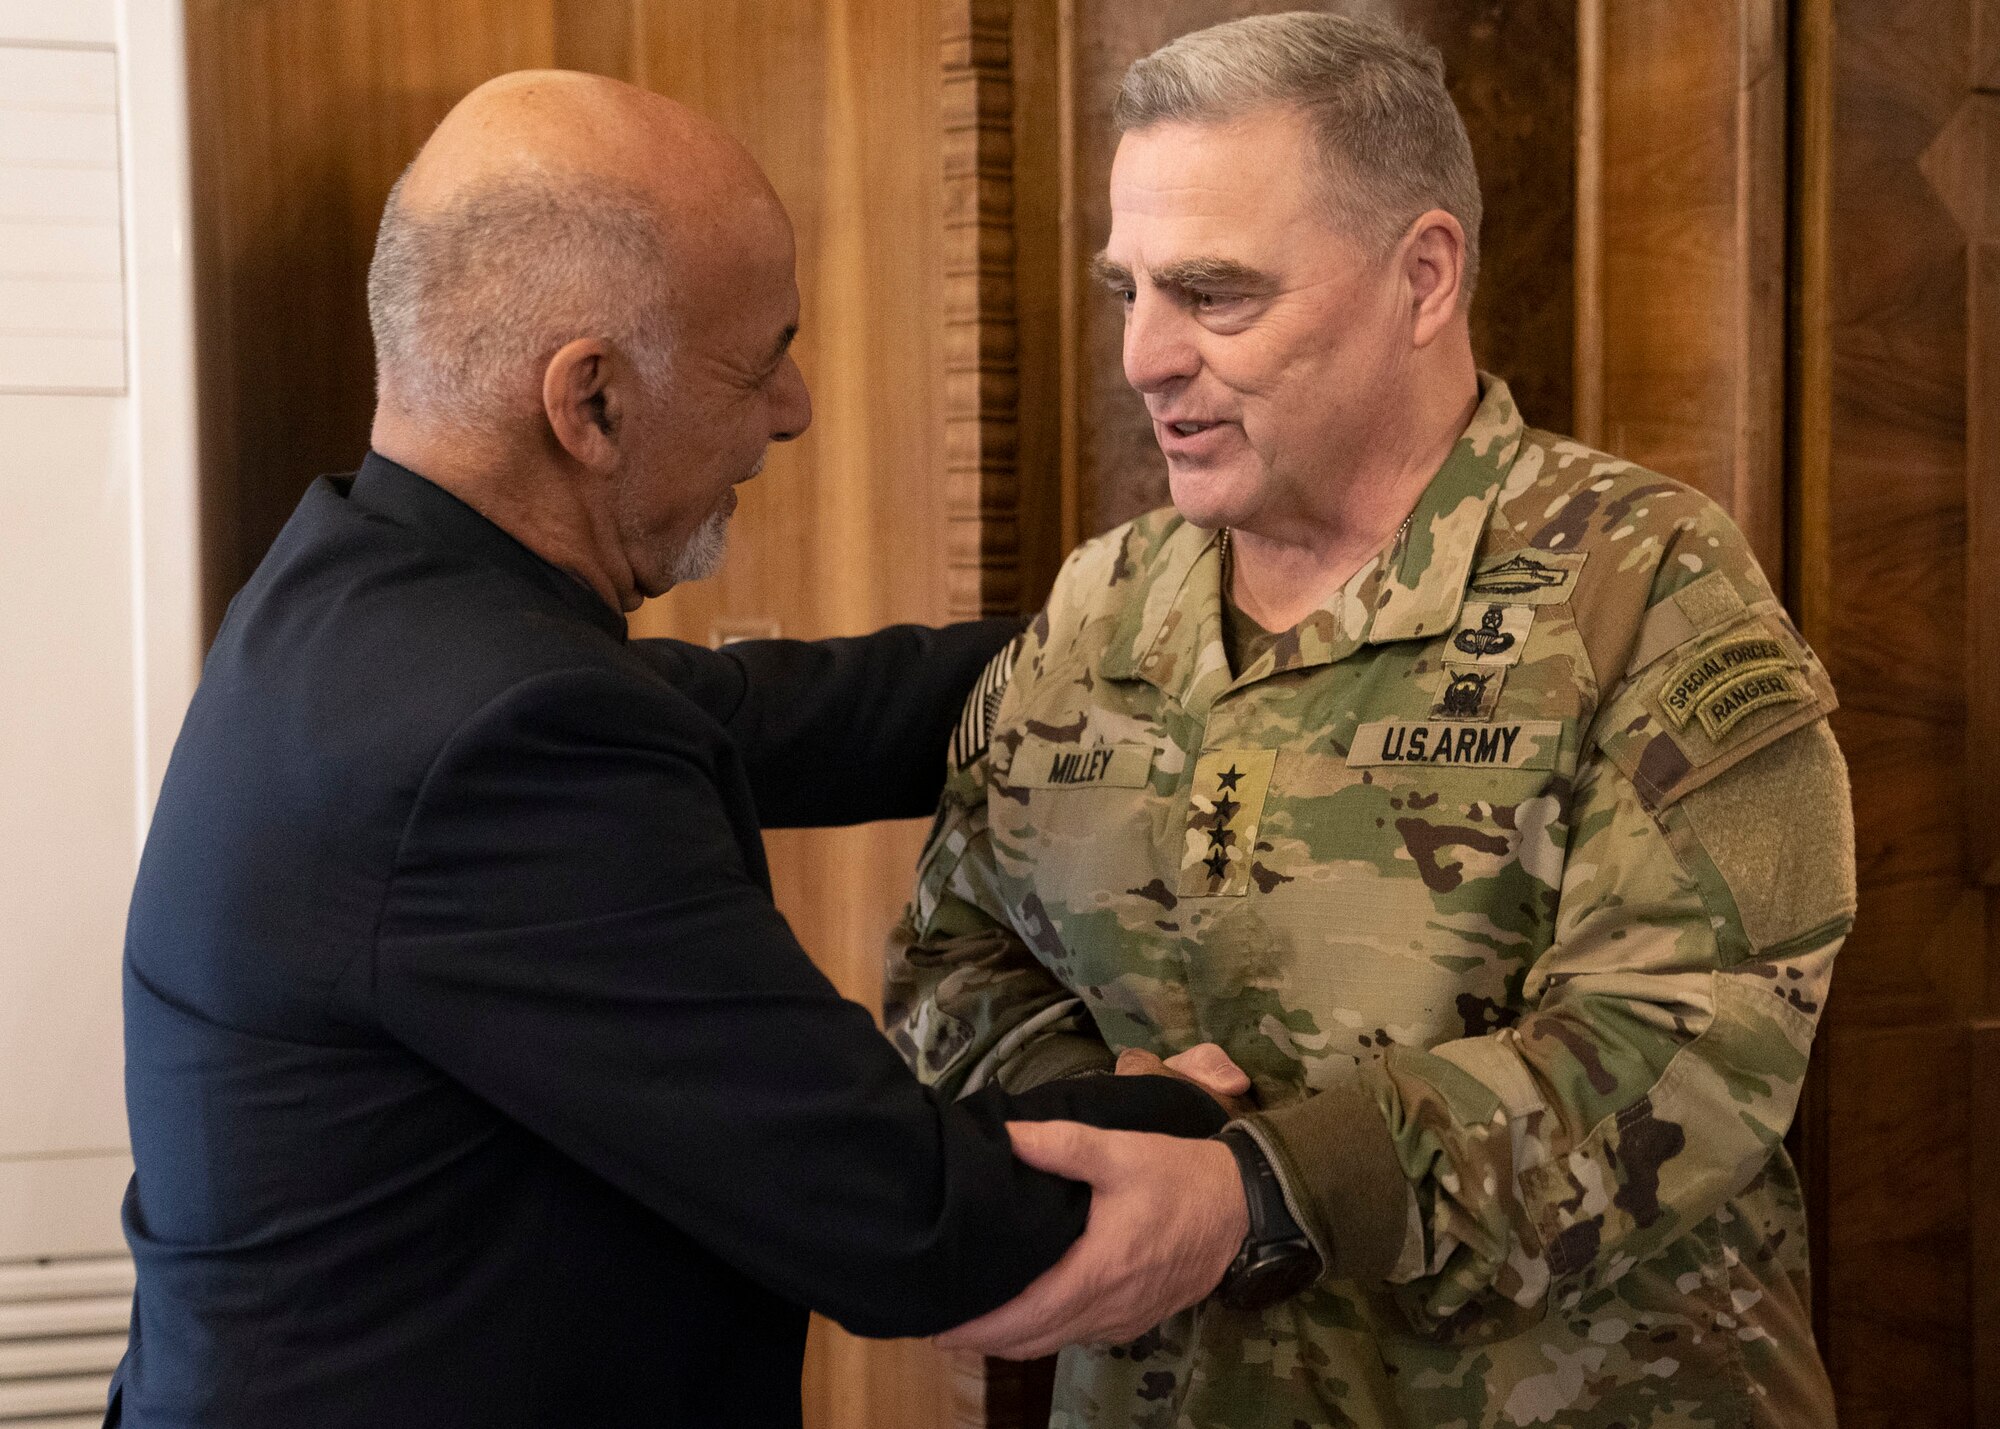 Army Gen. Mark A. Milley, chairman of the Joint Chiefs of Staff, meets with President of Afghanistan Ashraf Ghani at the Presidential Palace in Kabul, Afghanistan, Nov. 28, 2019.